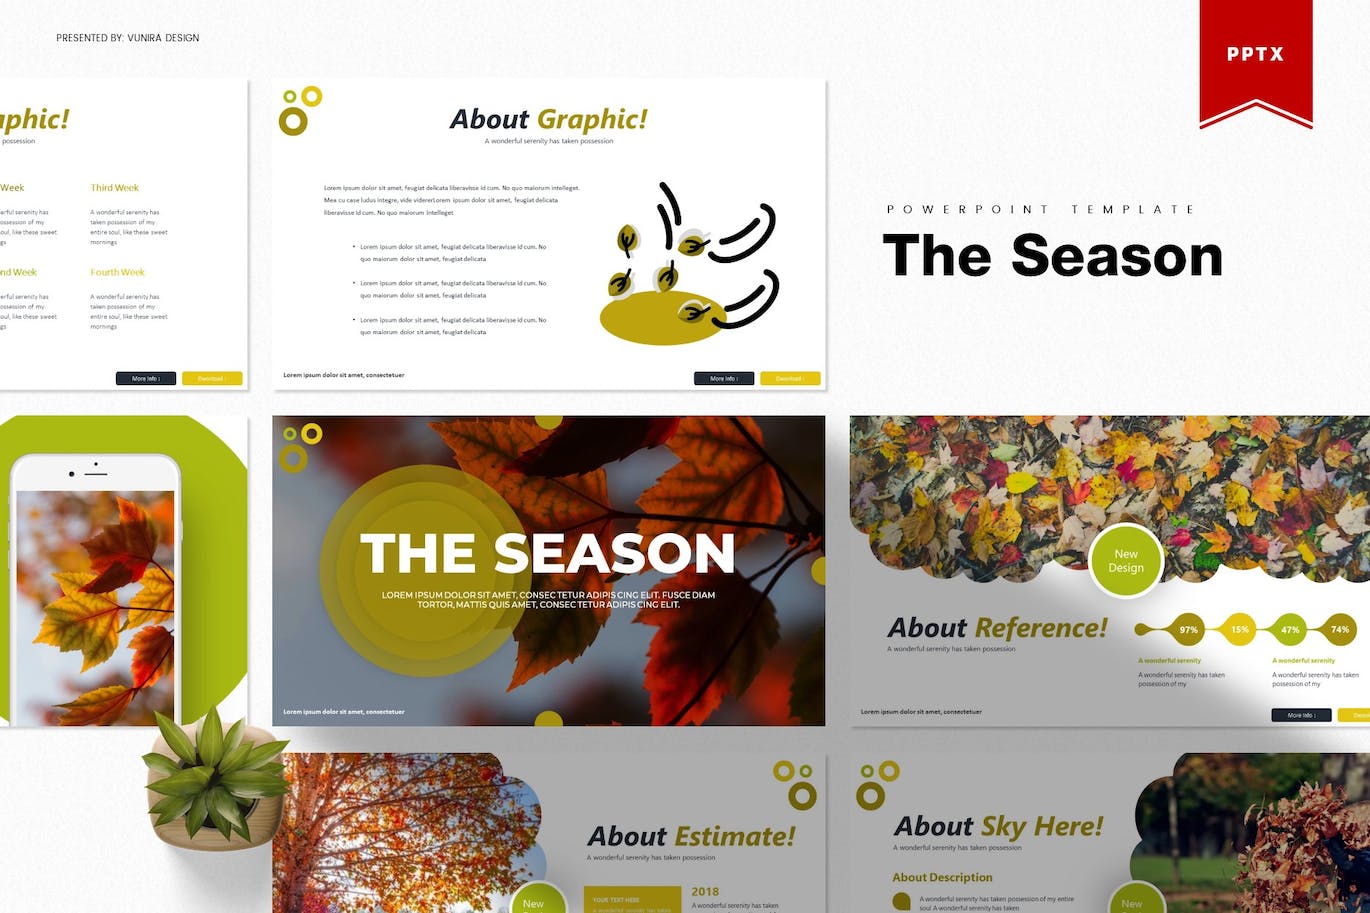 Bundle of images of colorful presentation template slides on autumn theme.